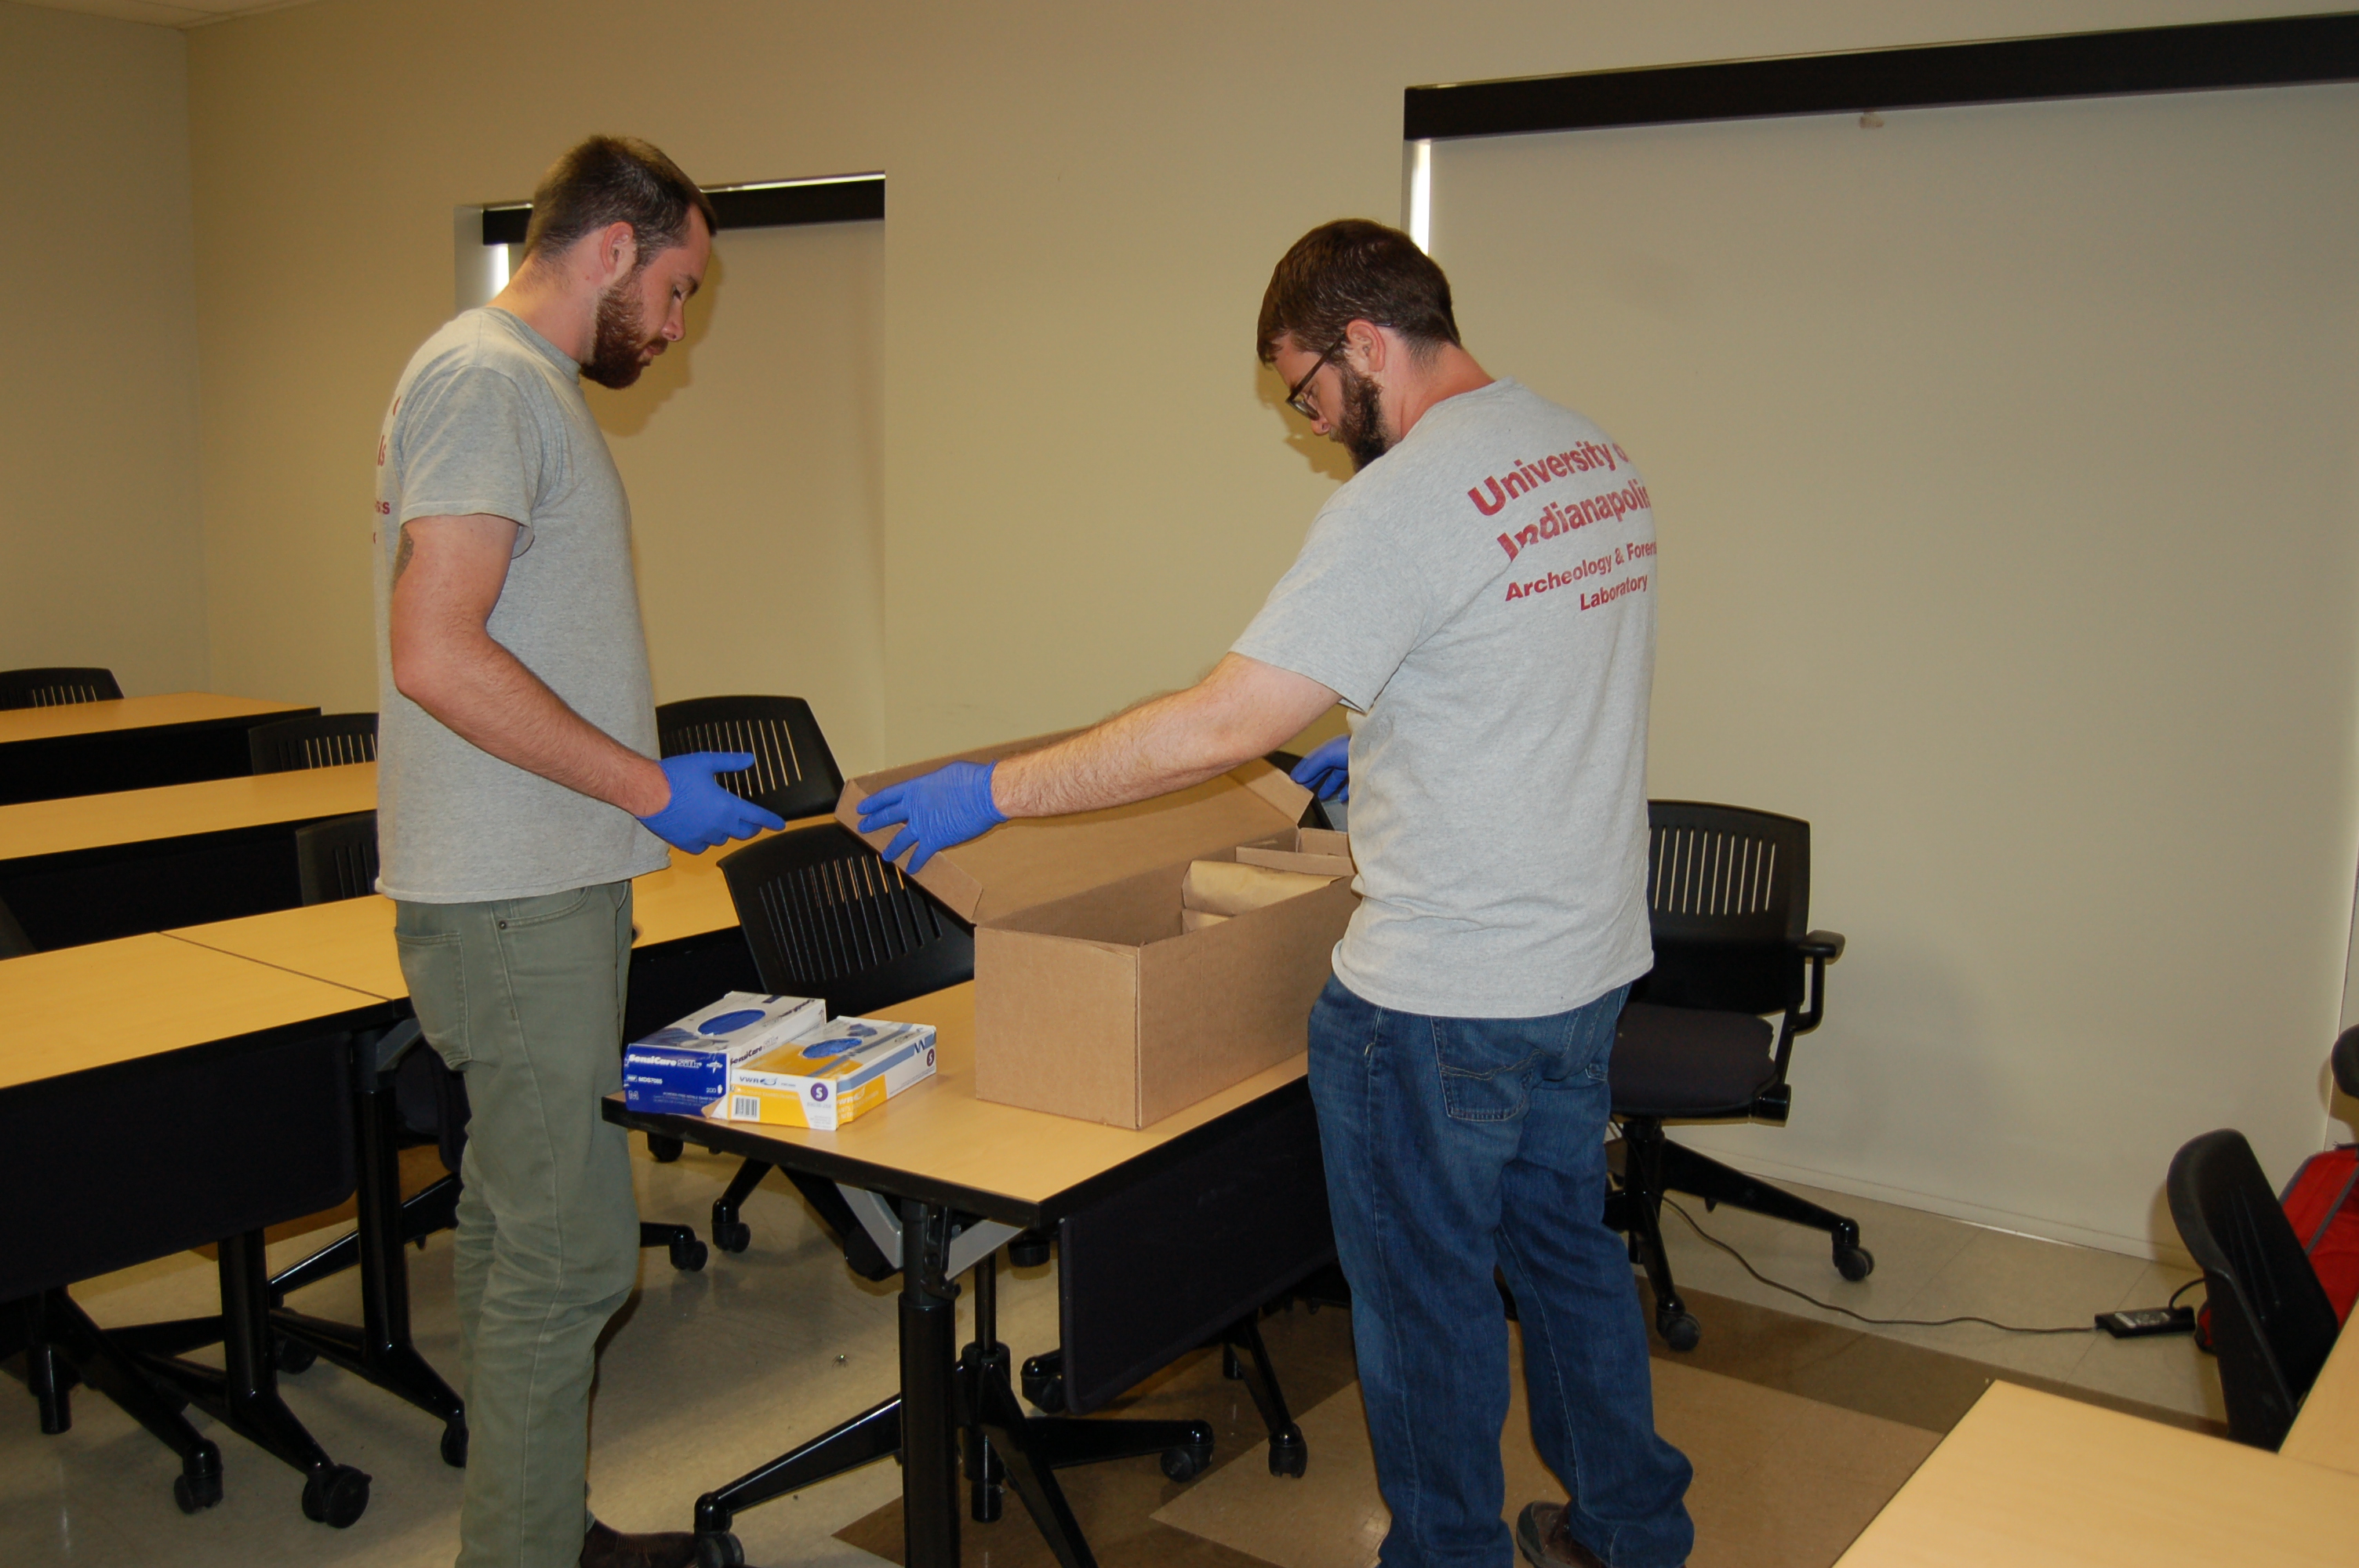 Two Beyond Borders Team Members opening a box with paper evidence bags within